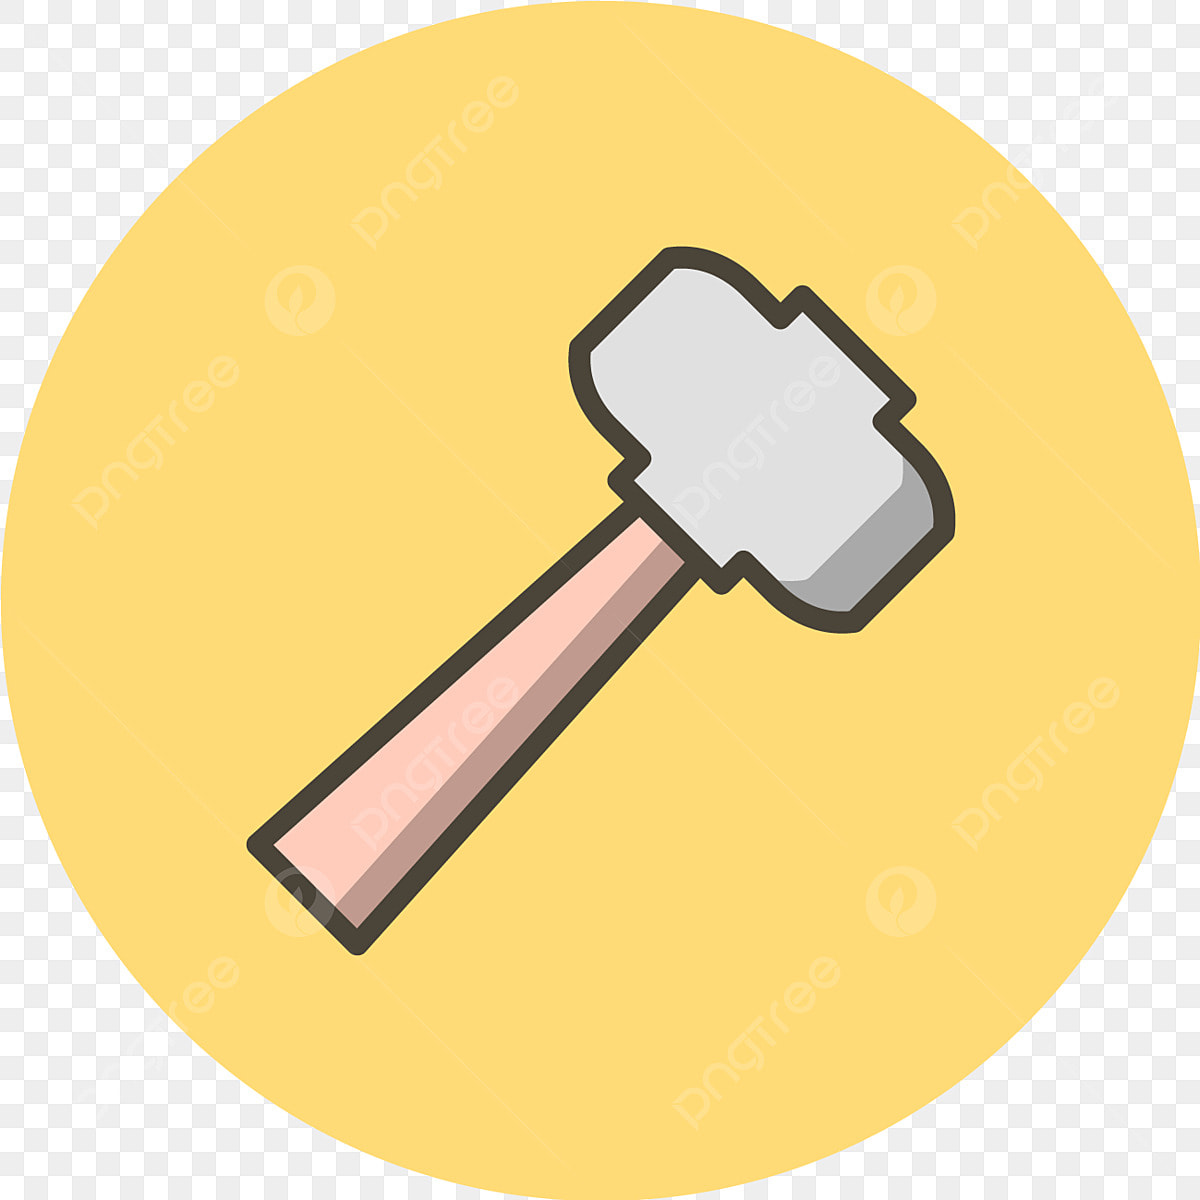 Hammering clipart vector vector hammer icon hammer icons hammer mallet png image for free download